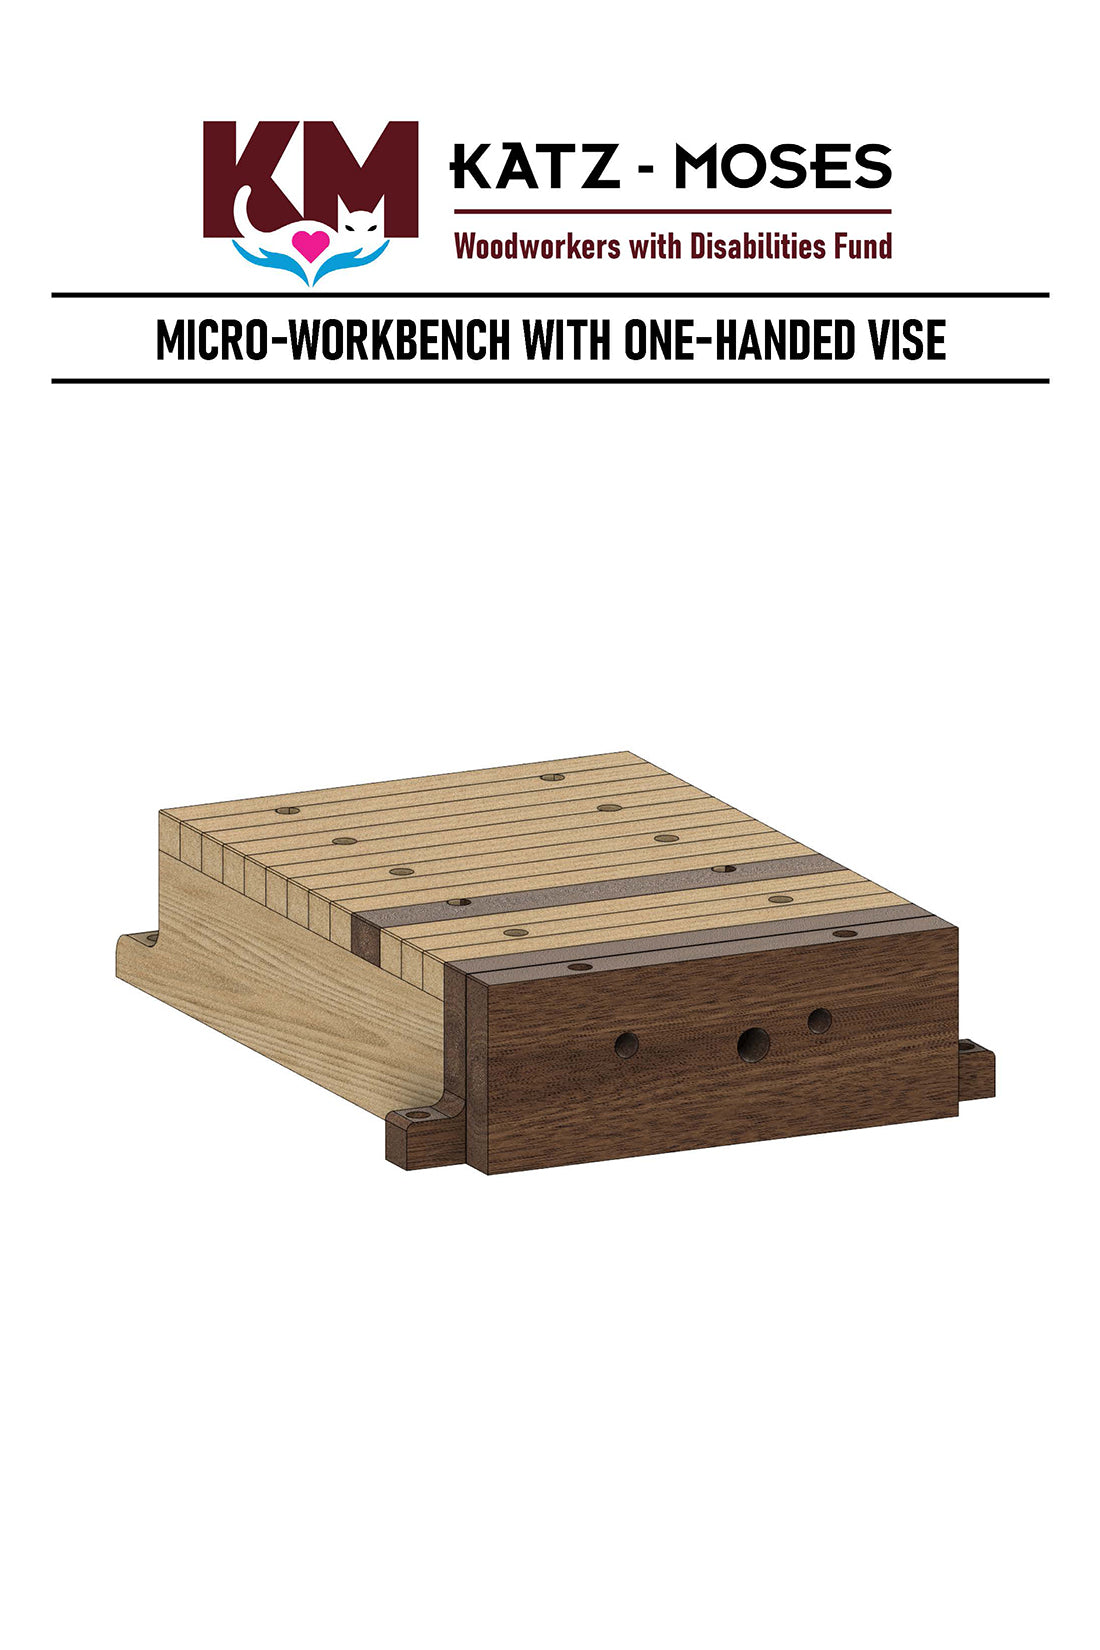 Micro-Workbench With One-Handed Vise Build Plans